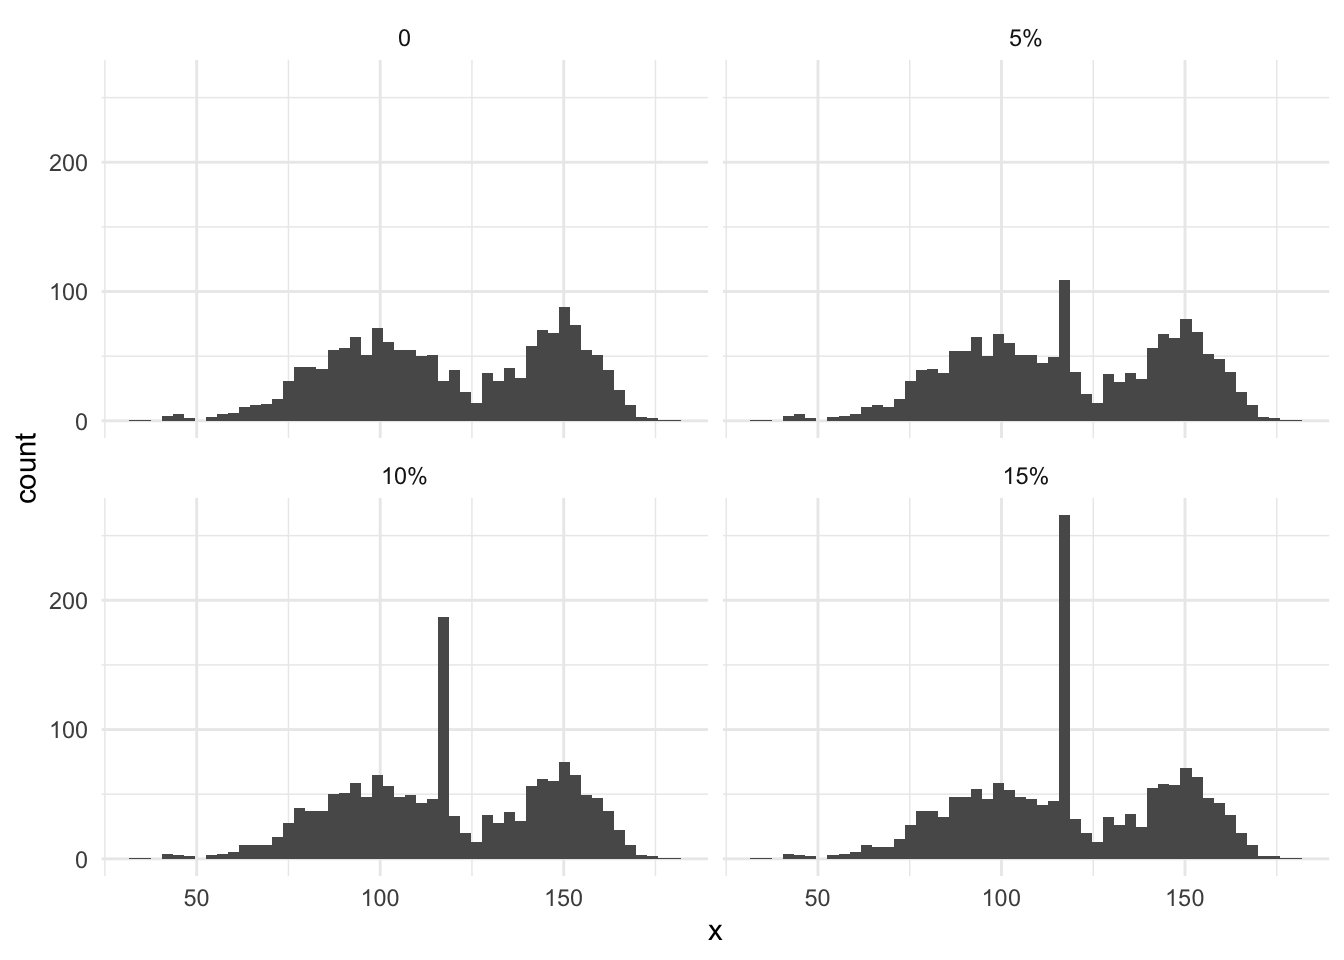 Facetted histogram chart. Predictor along the x-axis, count along the y-axis. facetted along 0%, 5%, 10%, and 15%. All of the distributions appear identical, with the the 5%, 10%, and 15% having a simple spike at the mean value, each being higher than the previous.